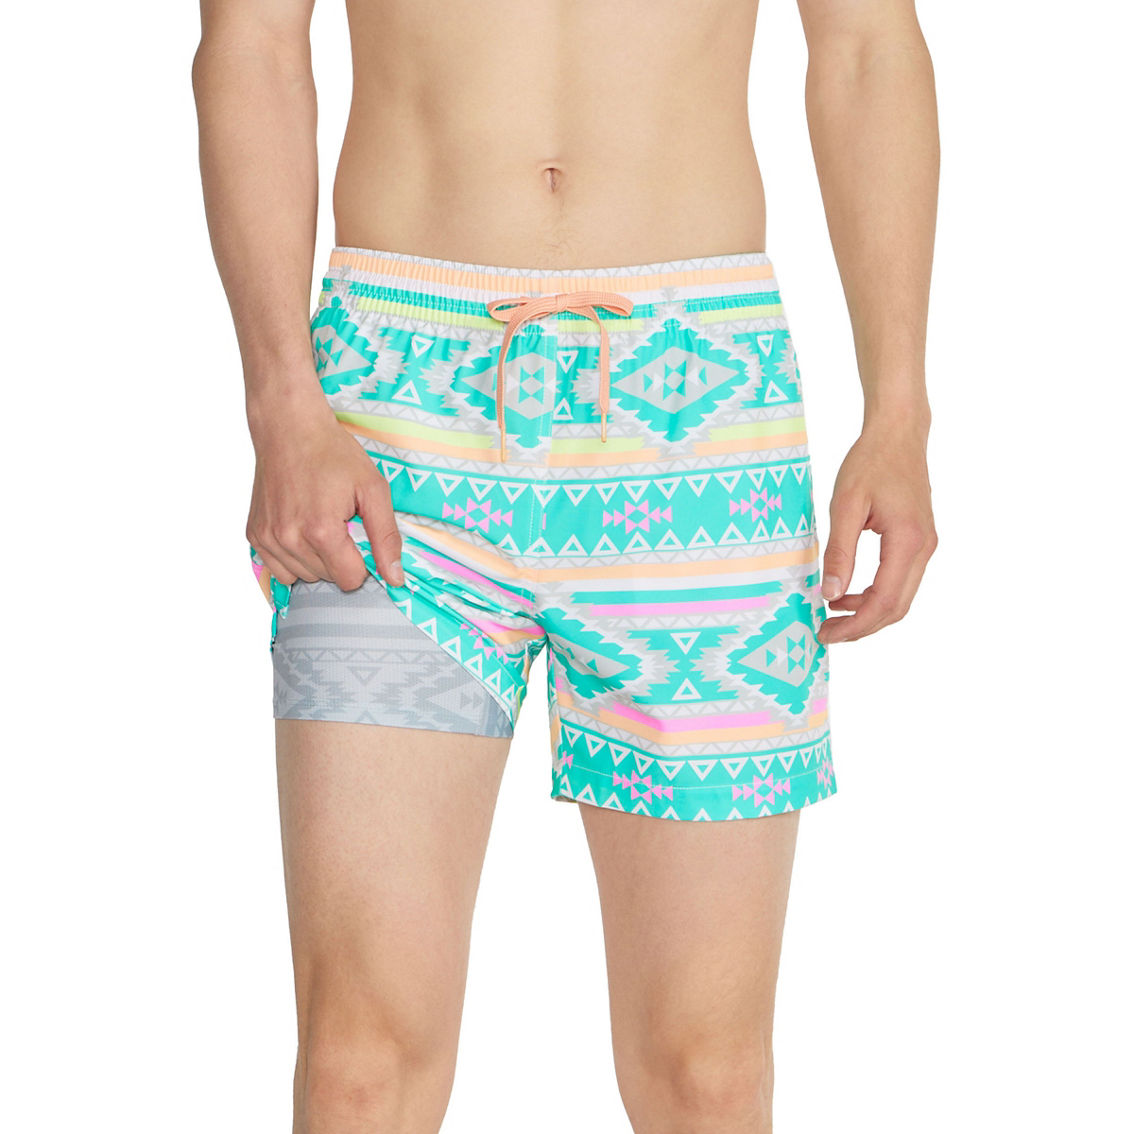 Chubbies The En Fuegos 5.5 in. Lined Classic Swim Trunks - Image 4 of 6